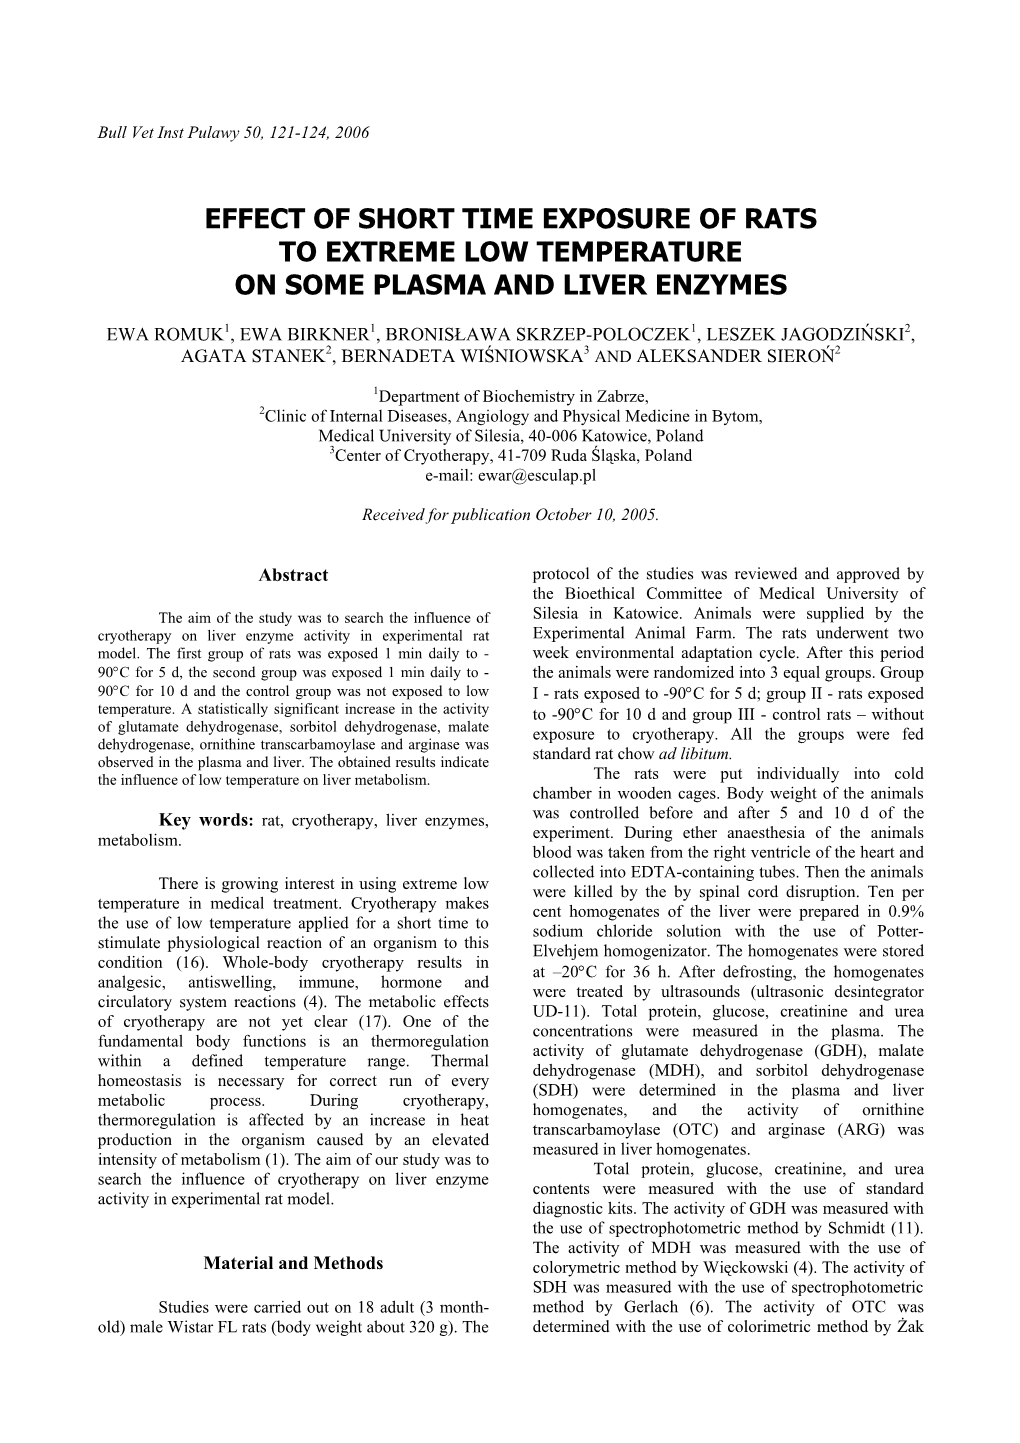 Effect of Short Time Exposure of Rats to Extreme Low Temperature on Some Plasma and Liver Enzymes